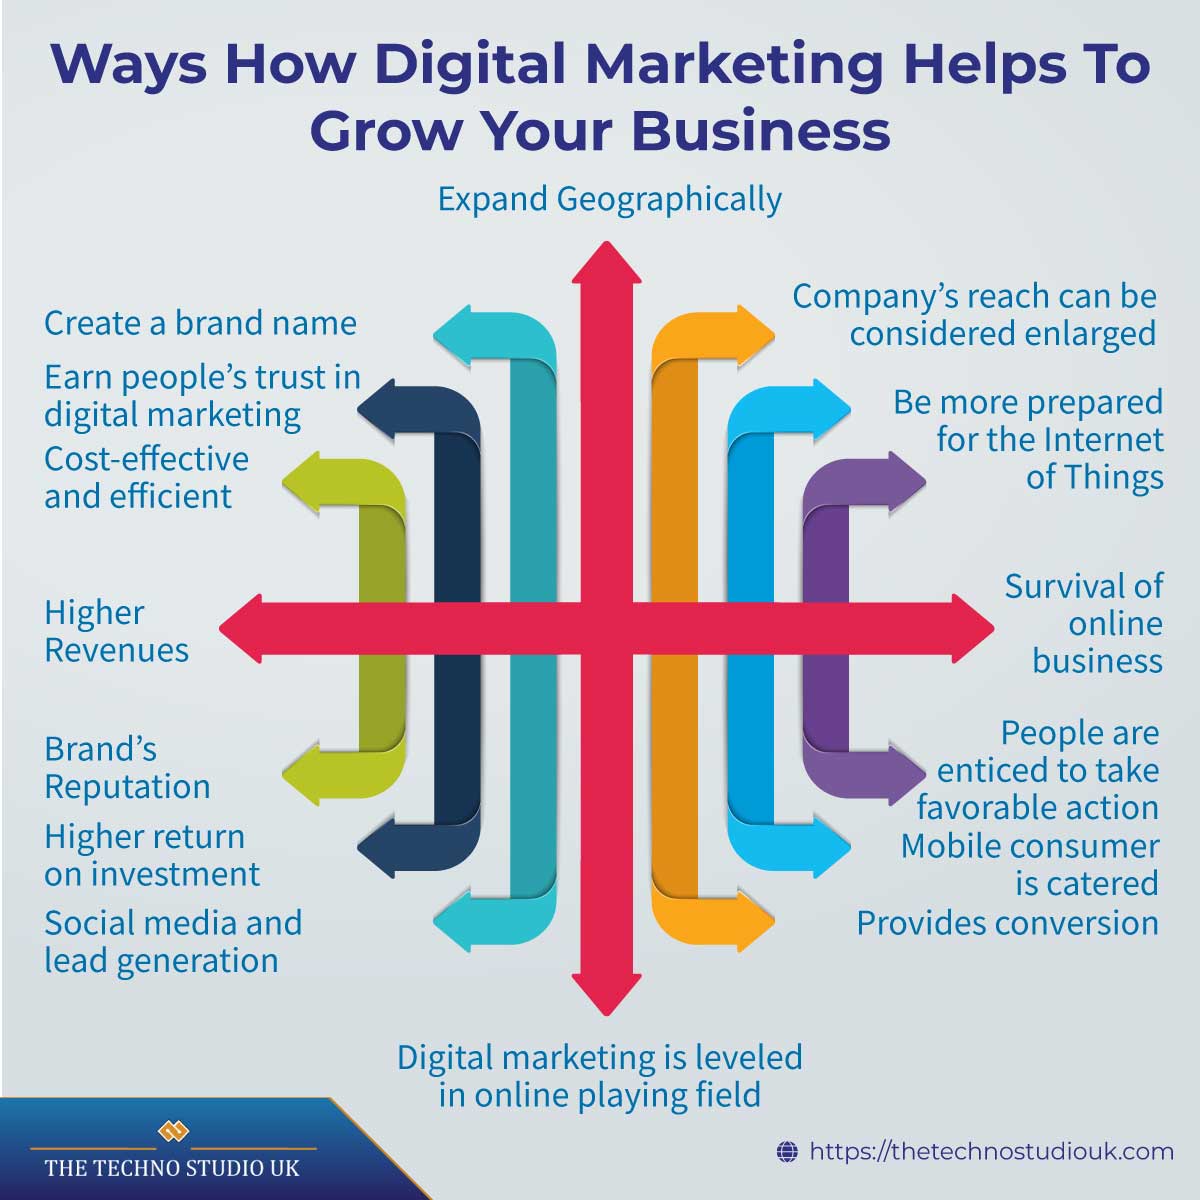 15 Ways How Digital Marketing Helps to Grow Your Business